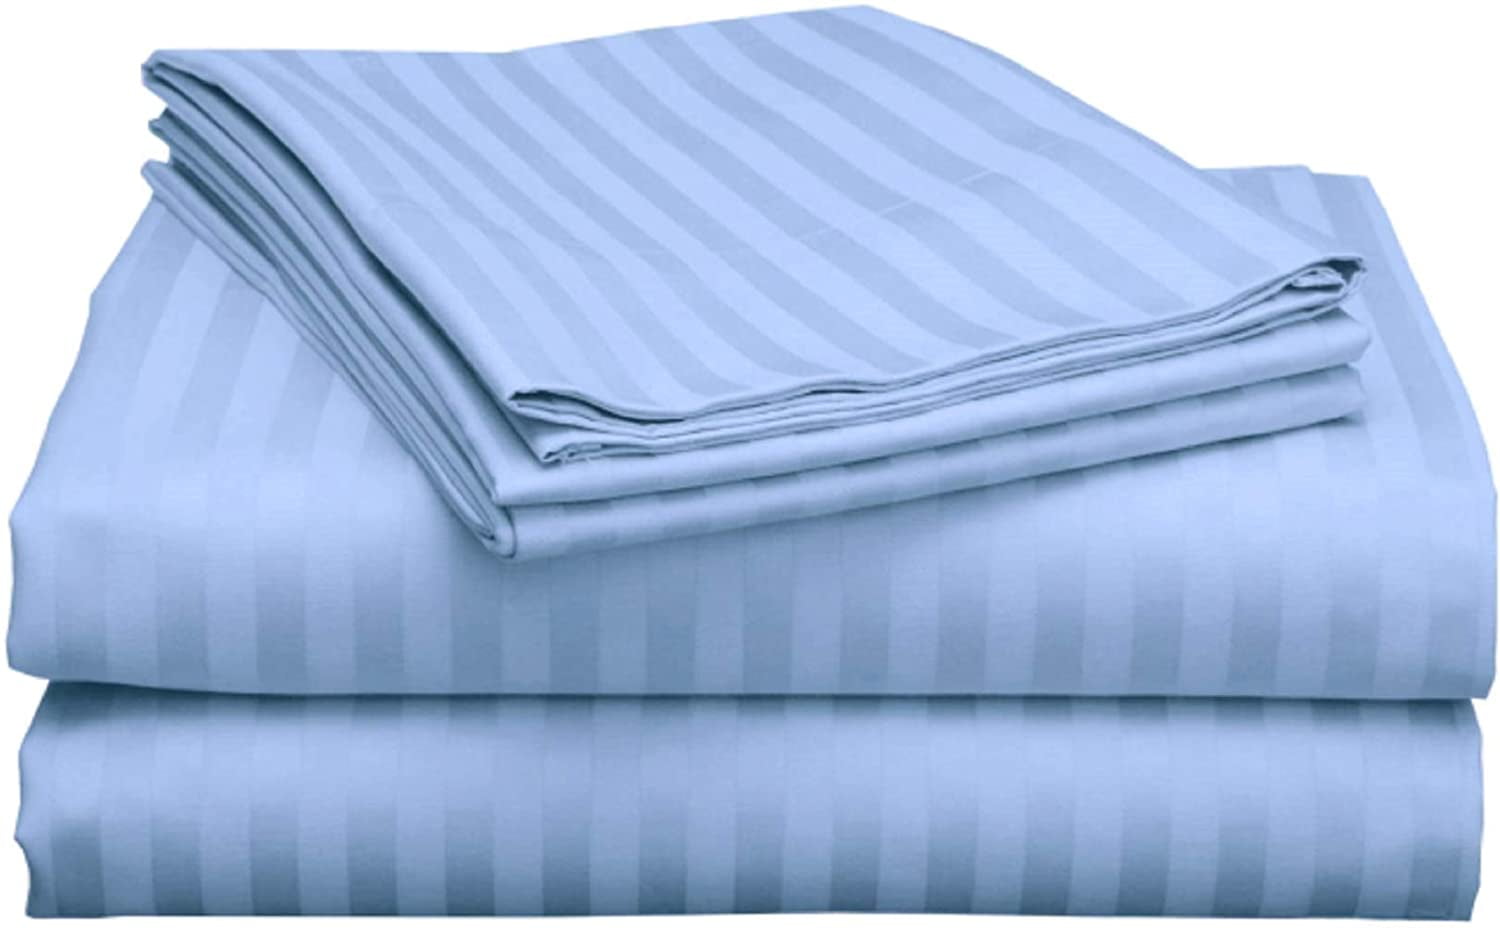 New Deluxe 1PCs 100% Egyptian Cotton Fitted Sheet 800TC Fit Pocket Striped Taupe 